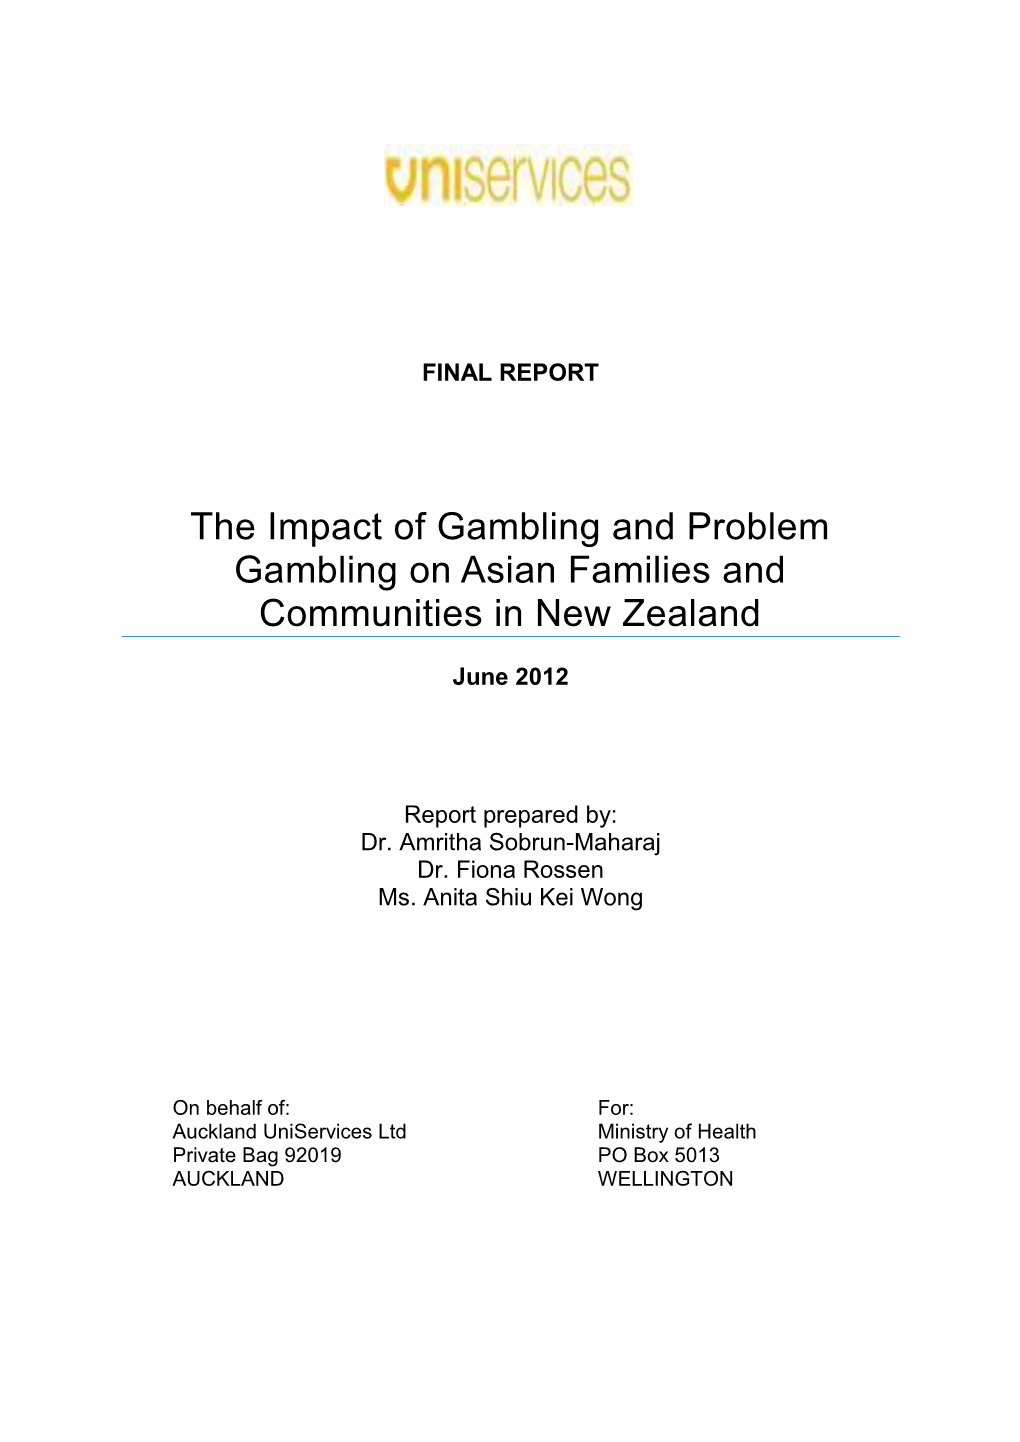 The Impact of Gambling and Problem Gambling on Asian Families and Communities in New Zealand